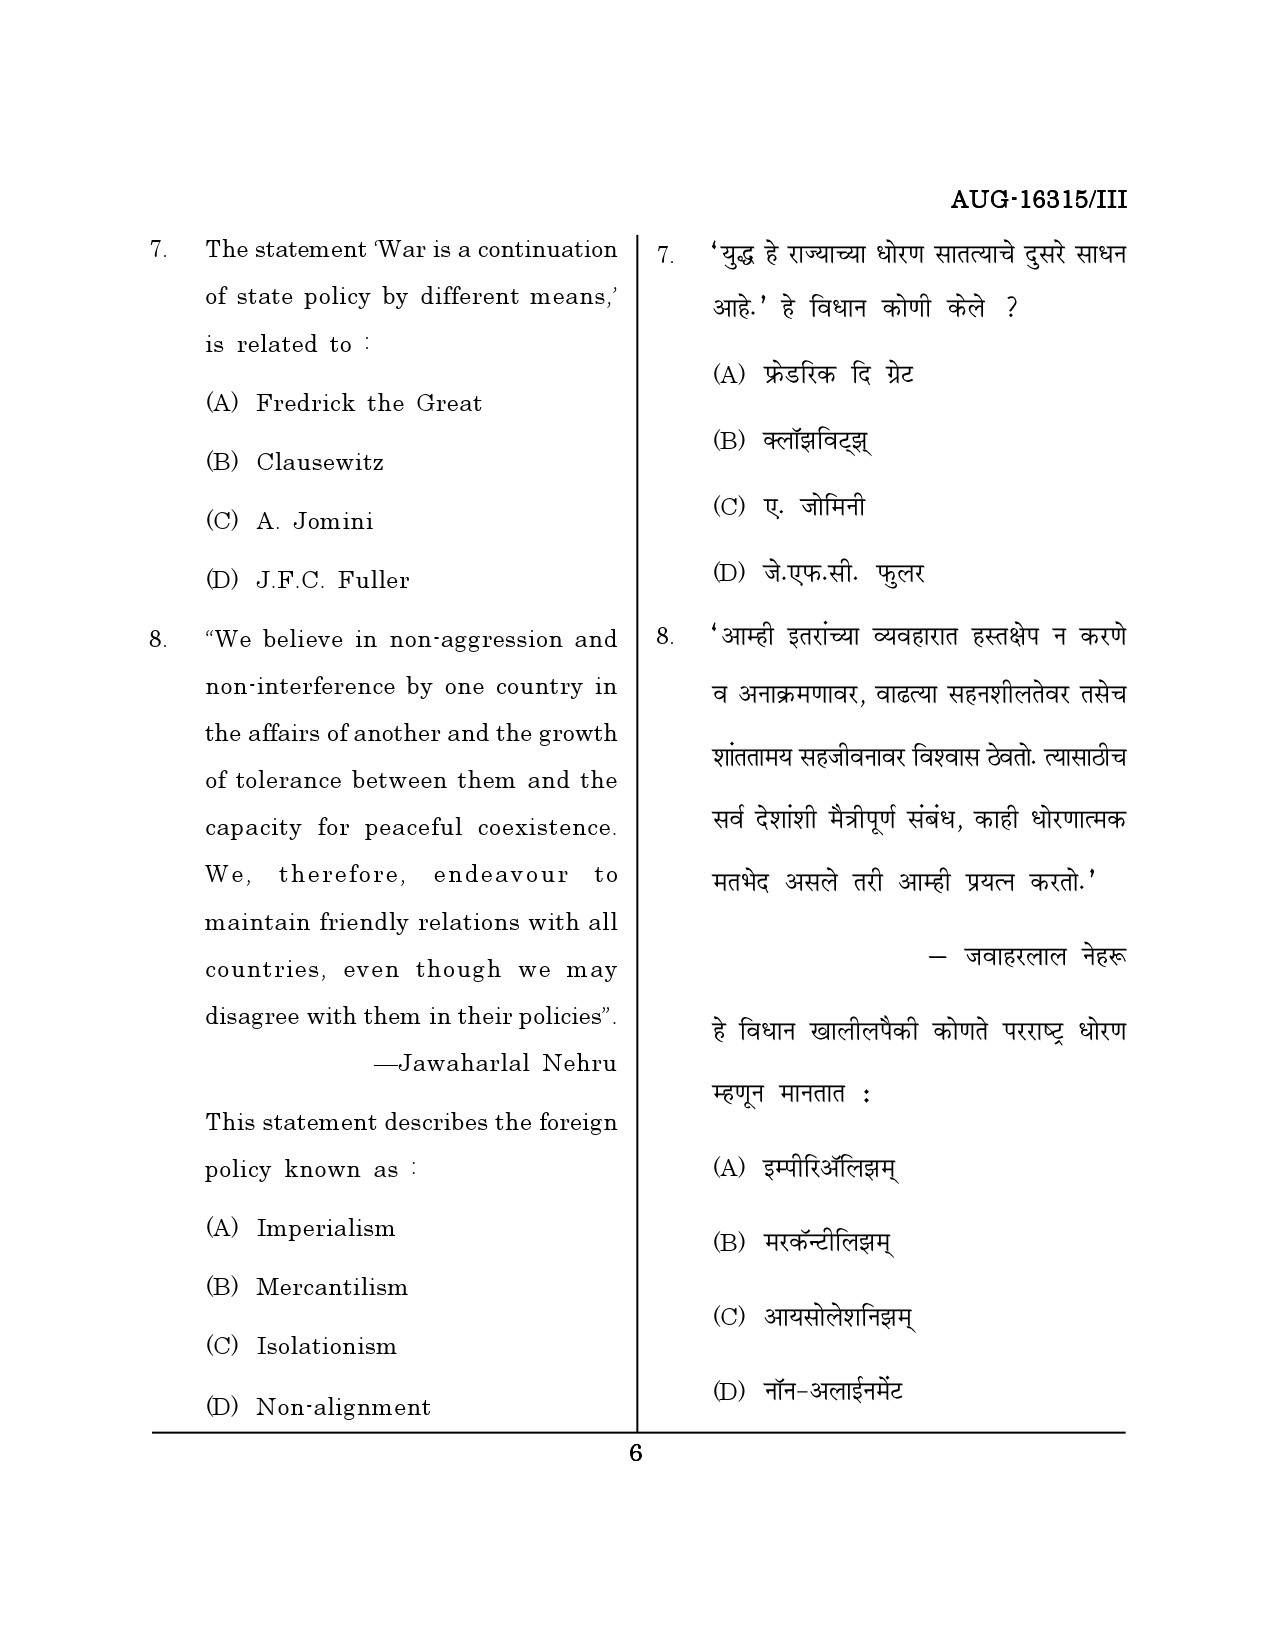 Maharashtra SET Defence and Strategic Studies Question Paper III August 2015 5